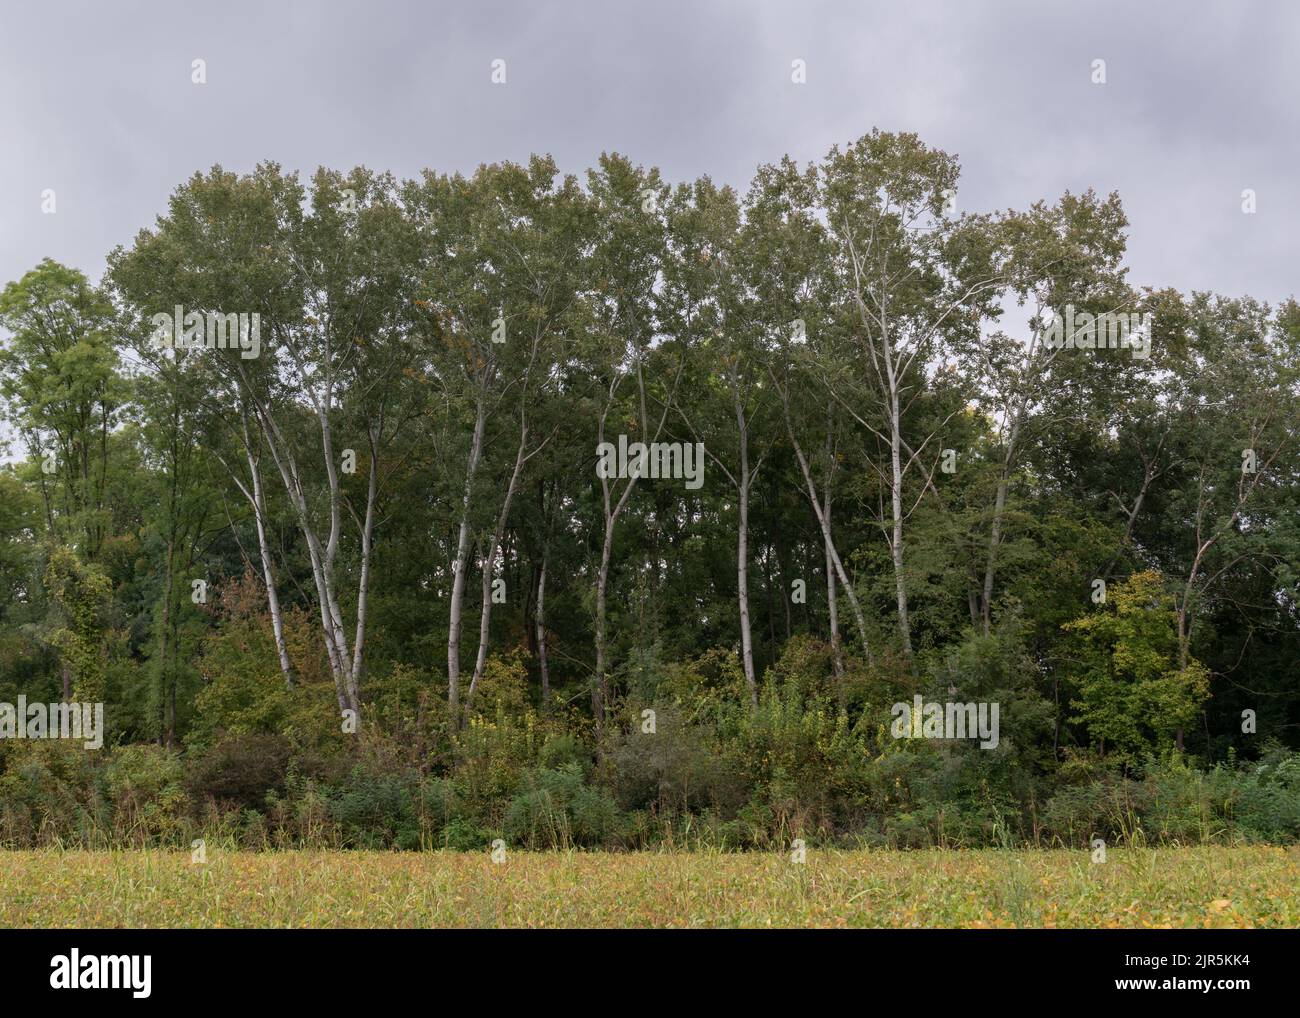 A grove of European poplars, tall silver-barked trees, in early autumn on a cloudy day Stock Photo